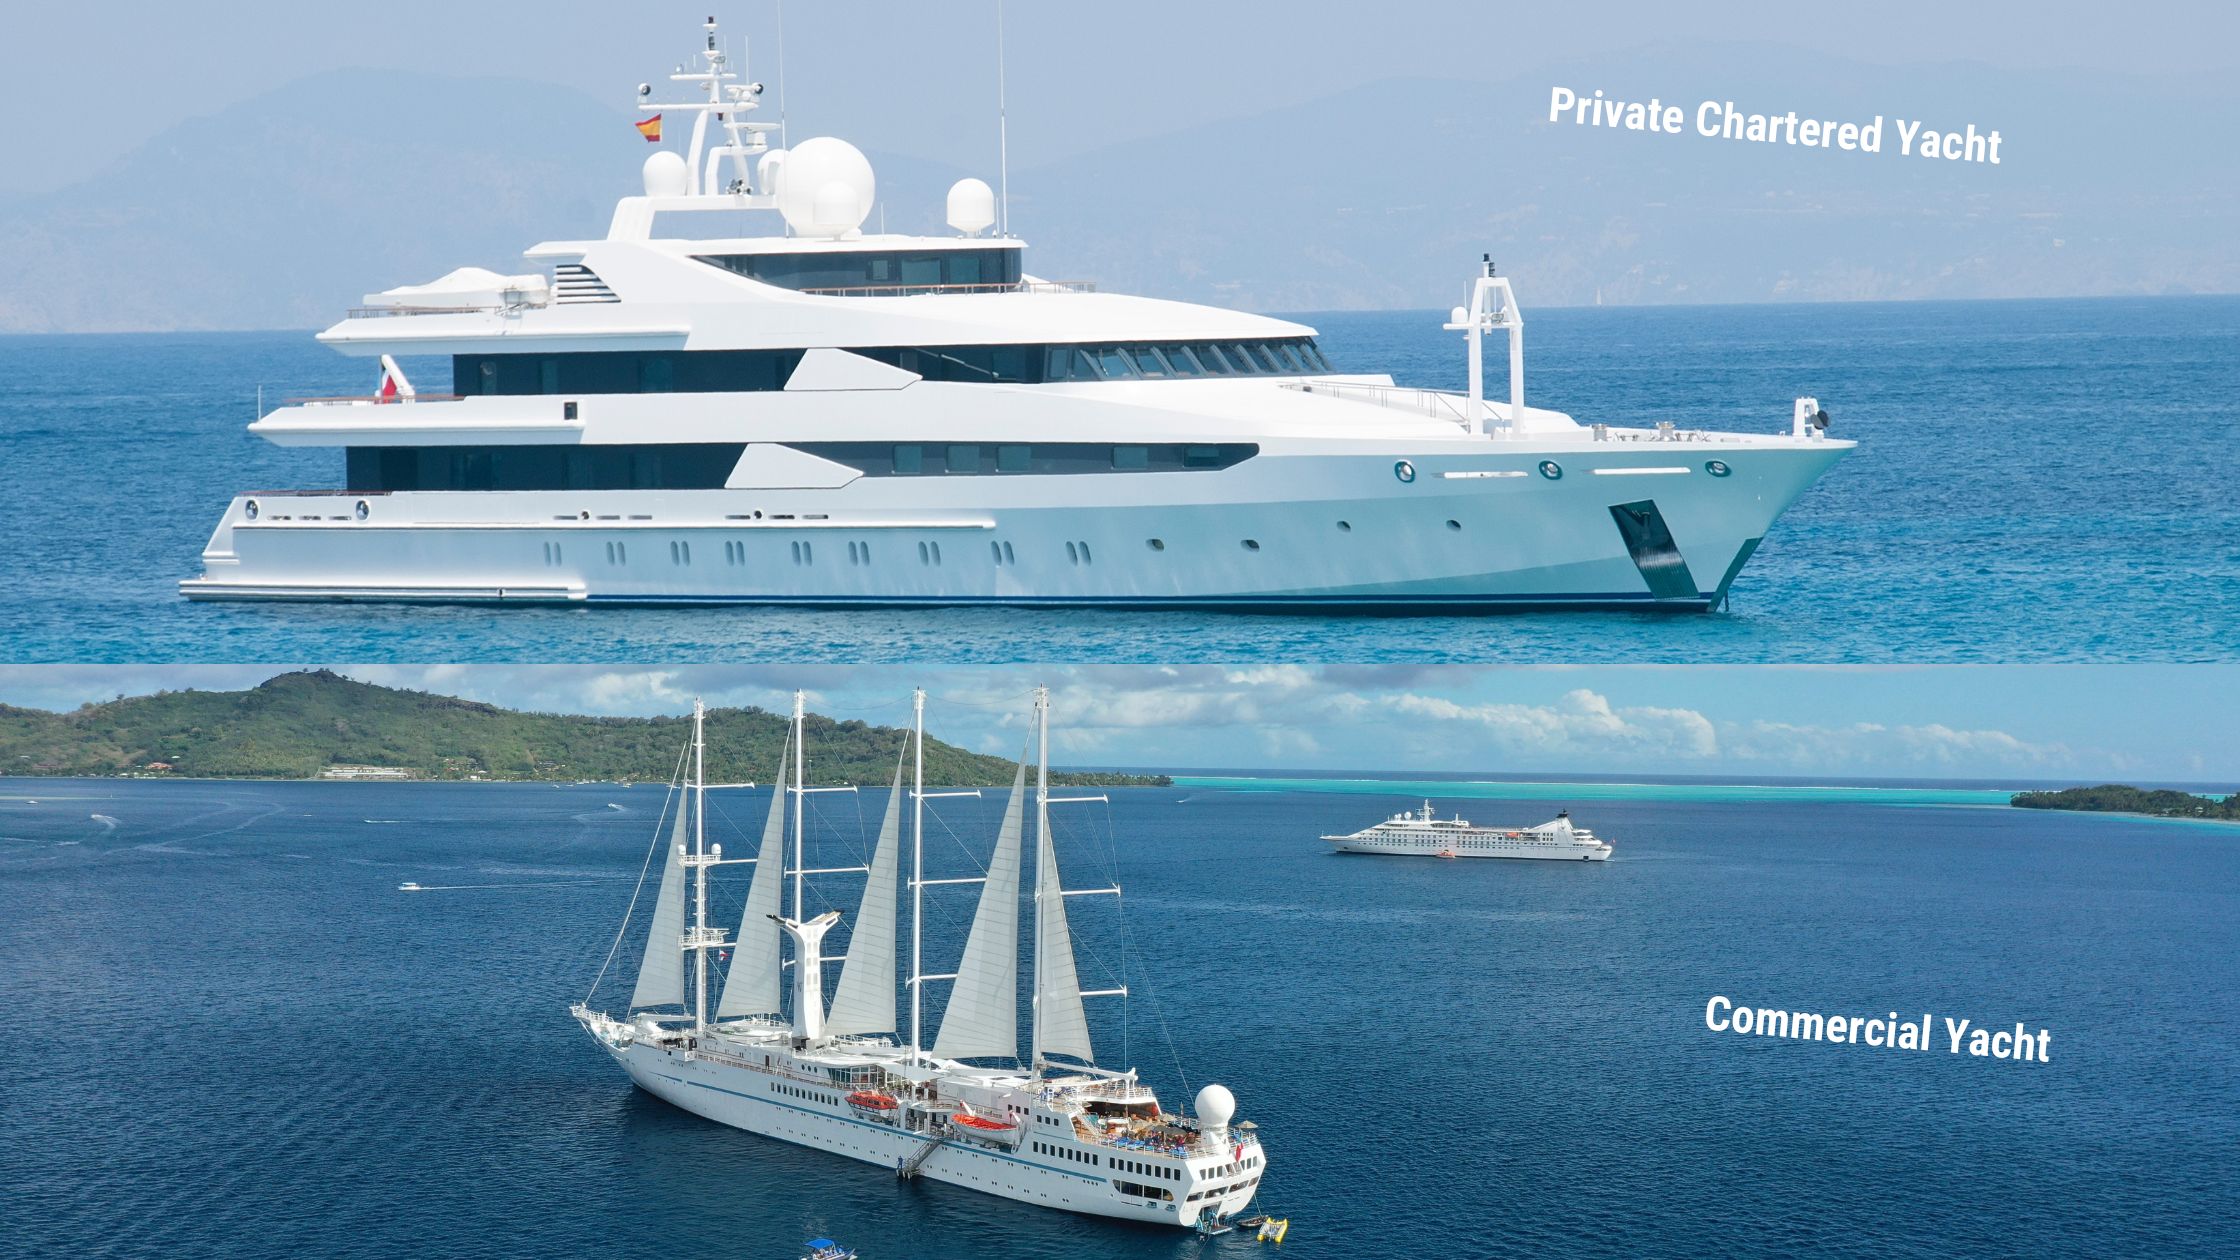 Commercial vs Private Chartered Yacht